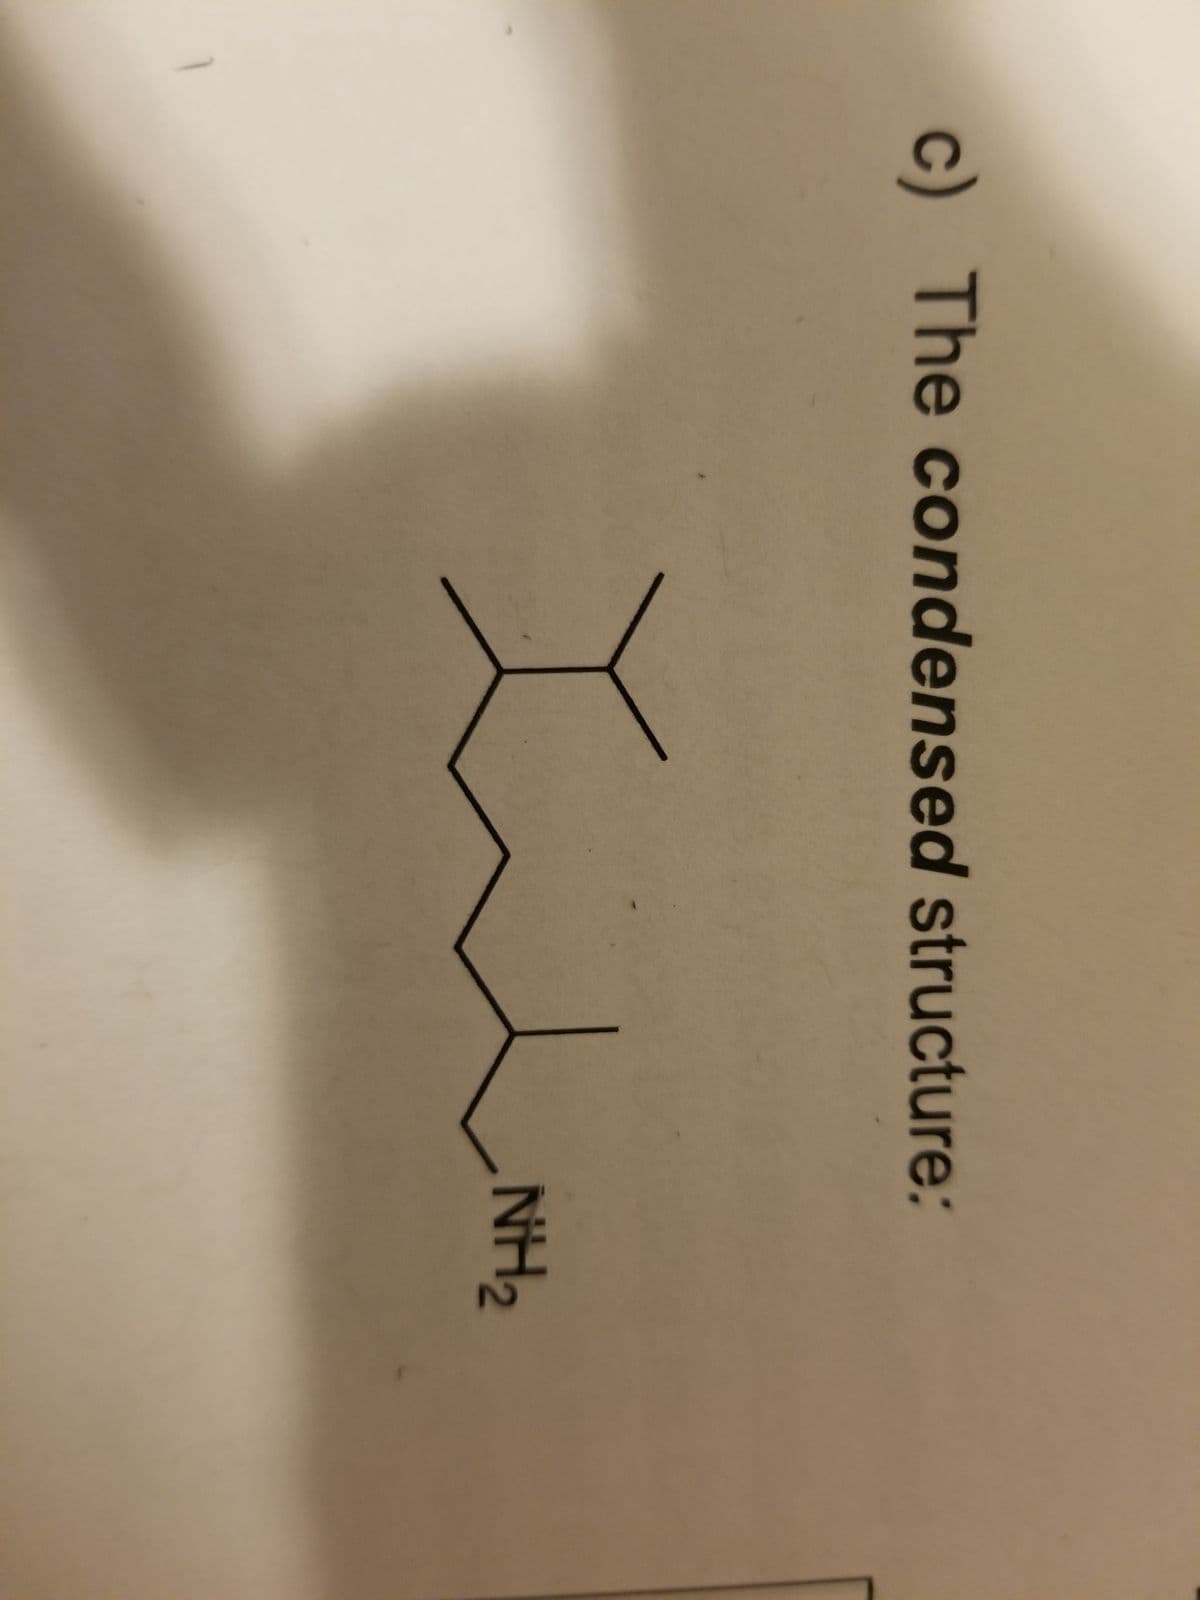 c) The condensed structure:
NH2
